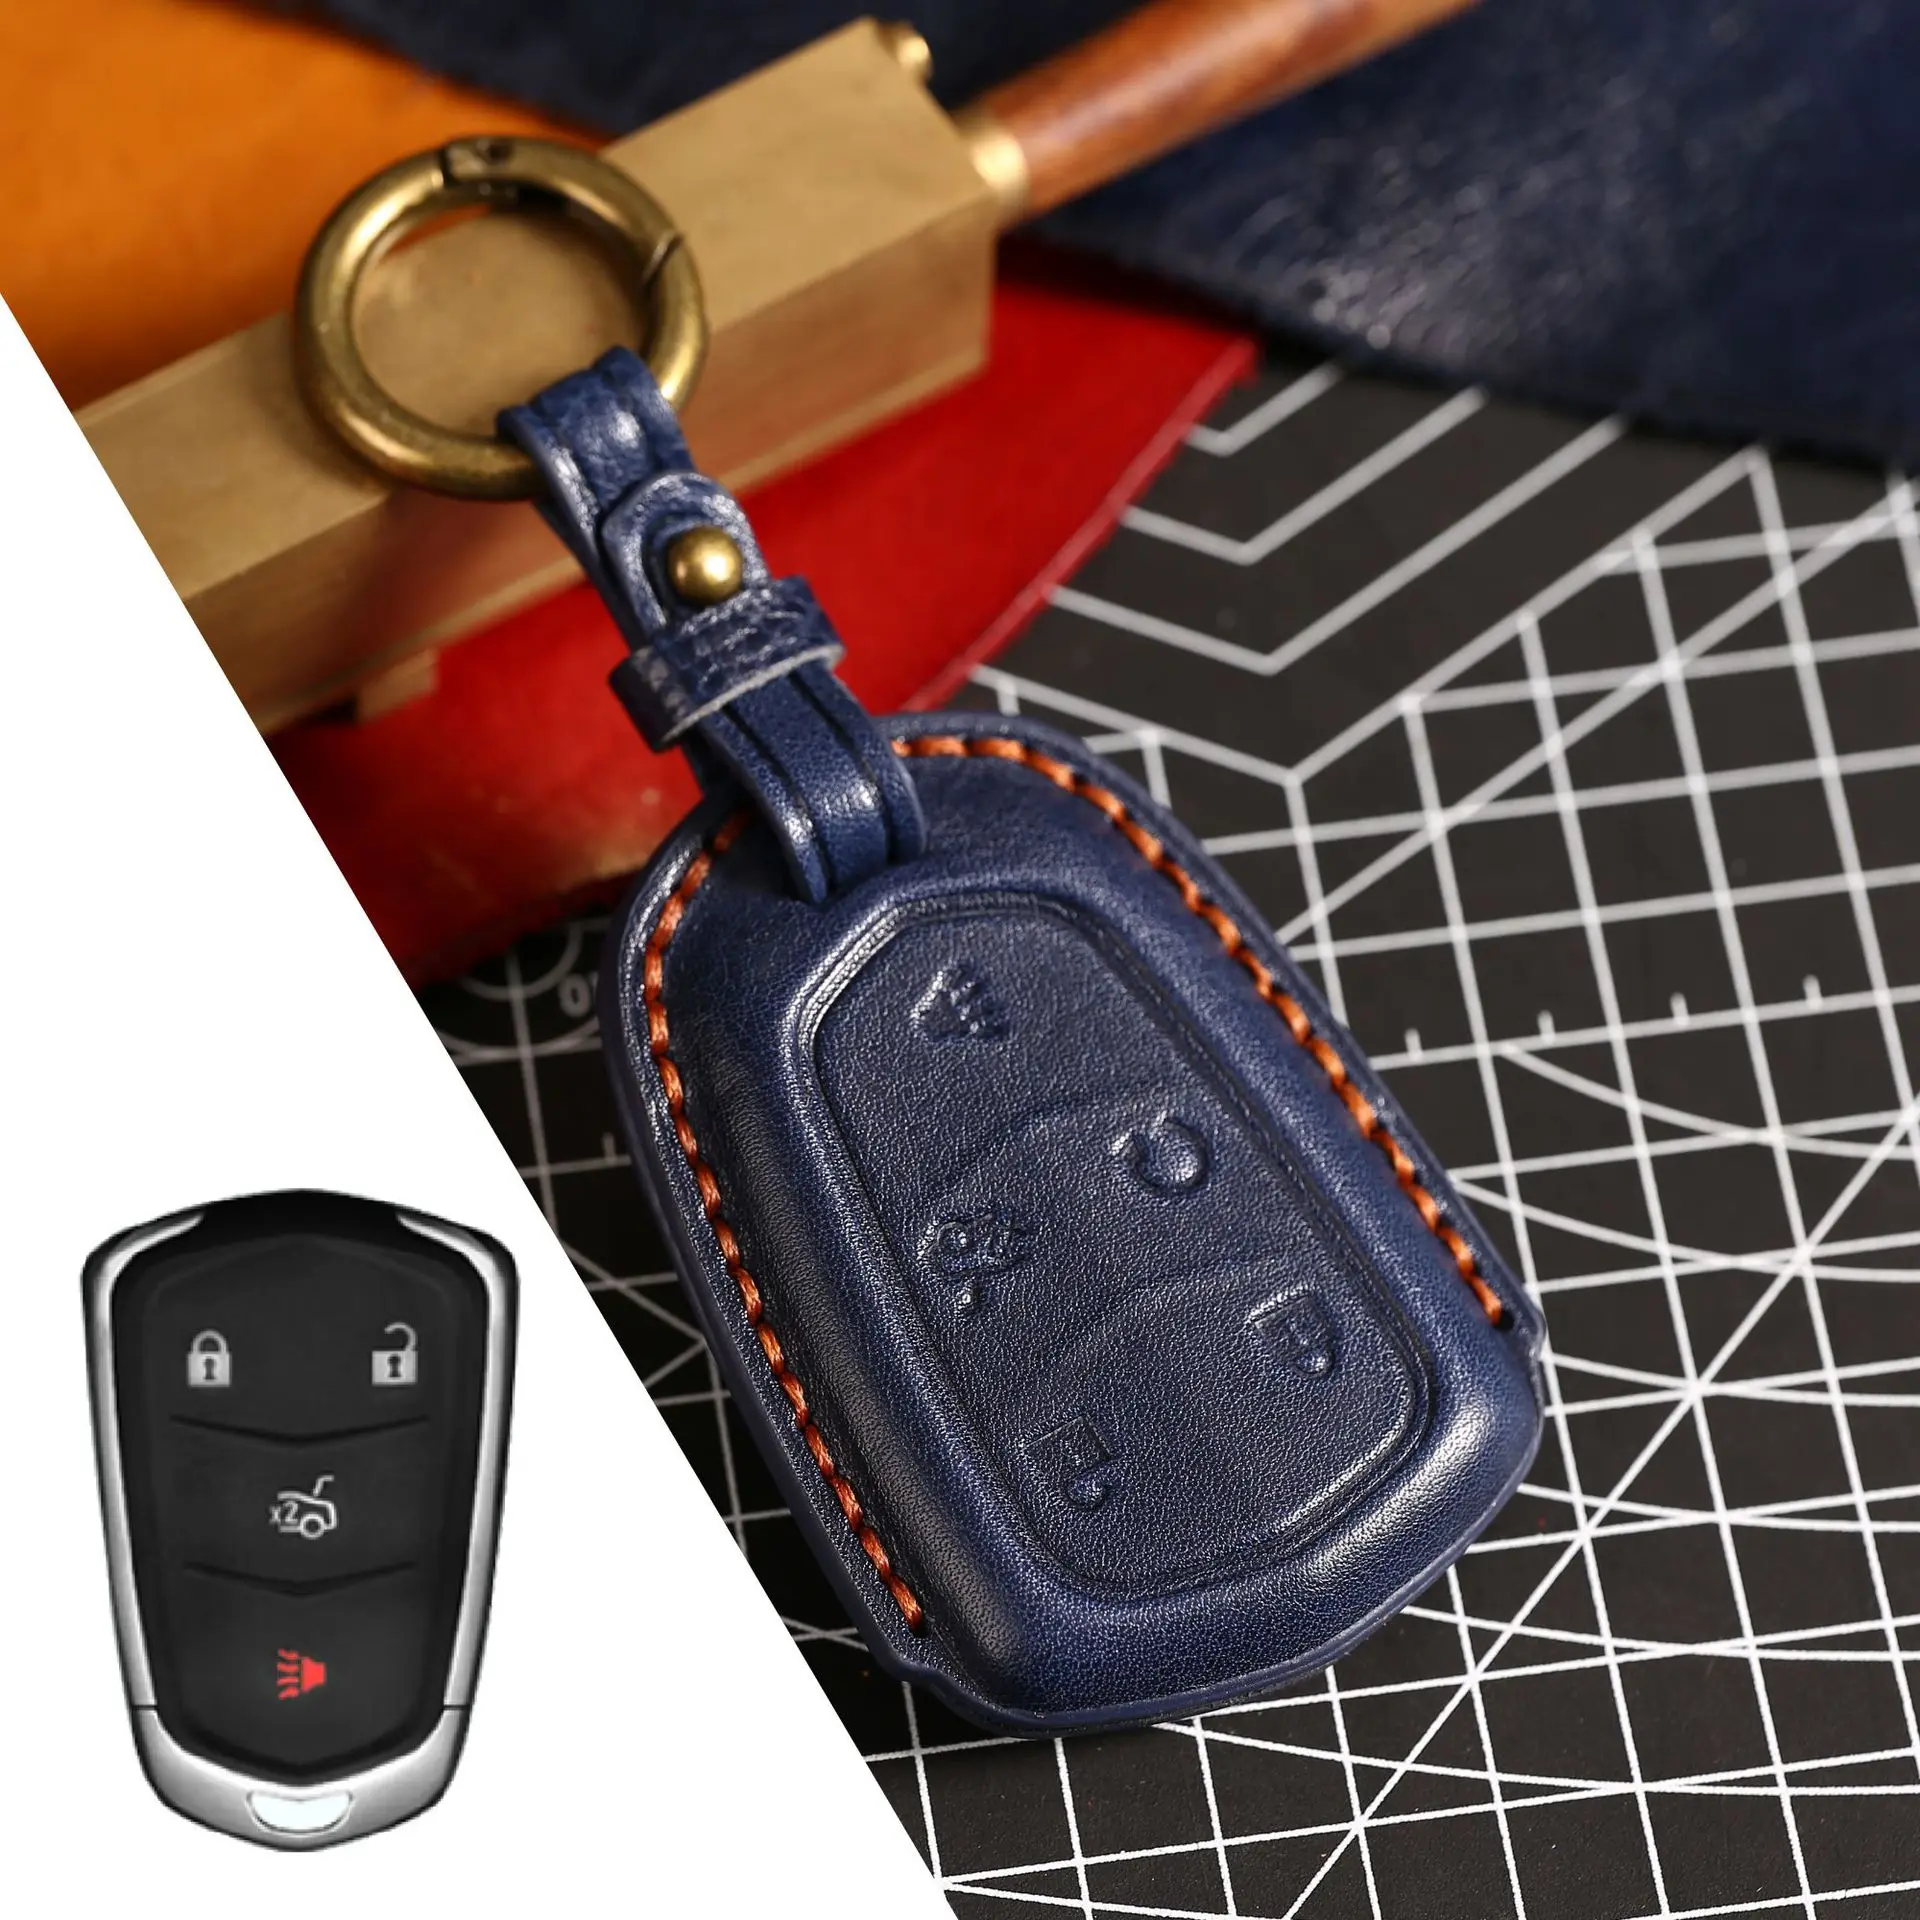 

Luxury Leather Car Key Case Cover Bag for Cadillac ATS CT6 CTS DTS XT5 XT6 CT4 CT5 CT6 Escalade ESV SRX STS XTS ELR 2014-2018